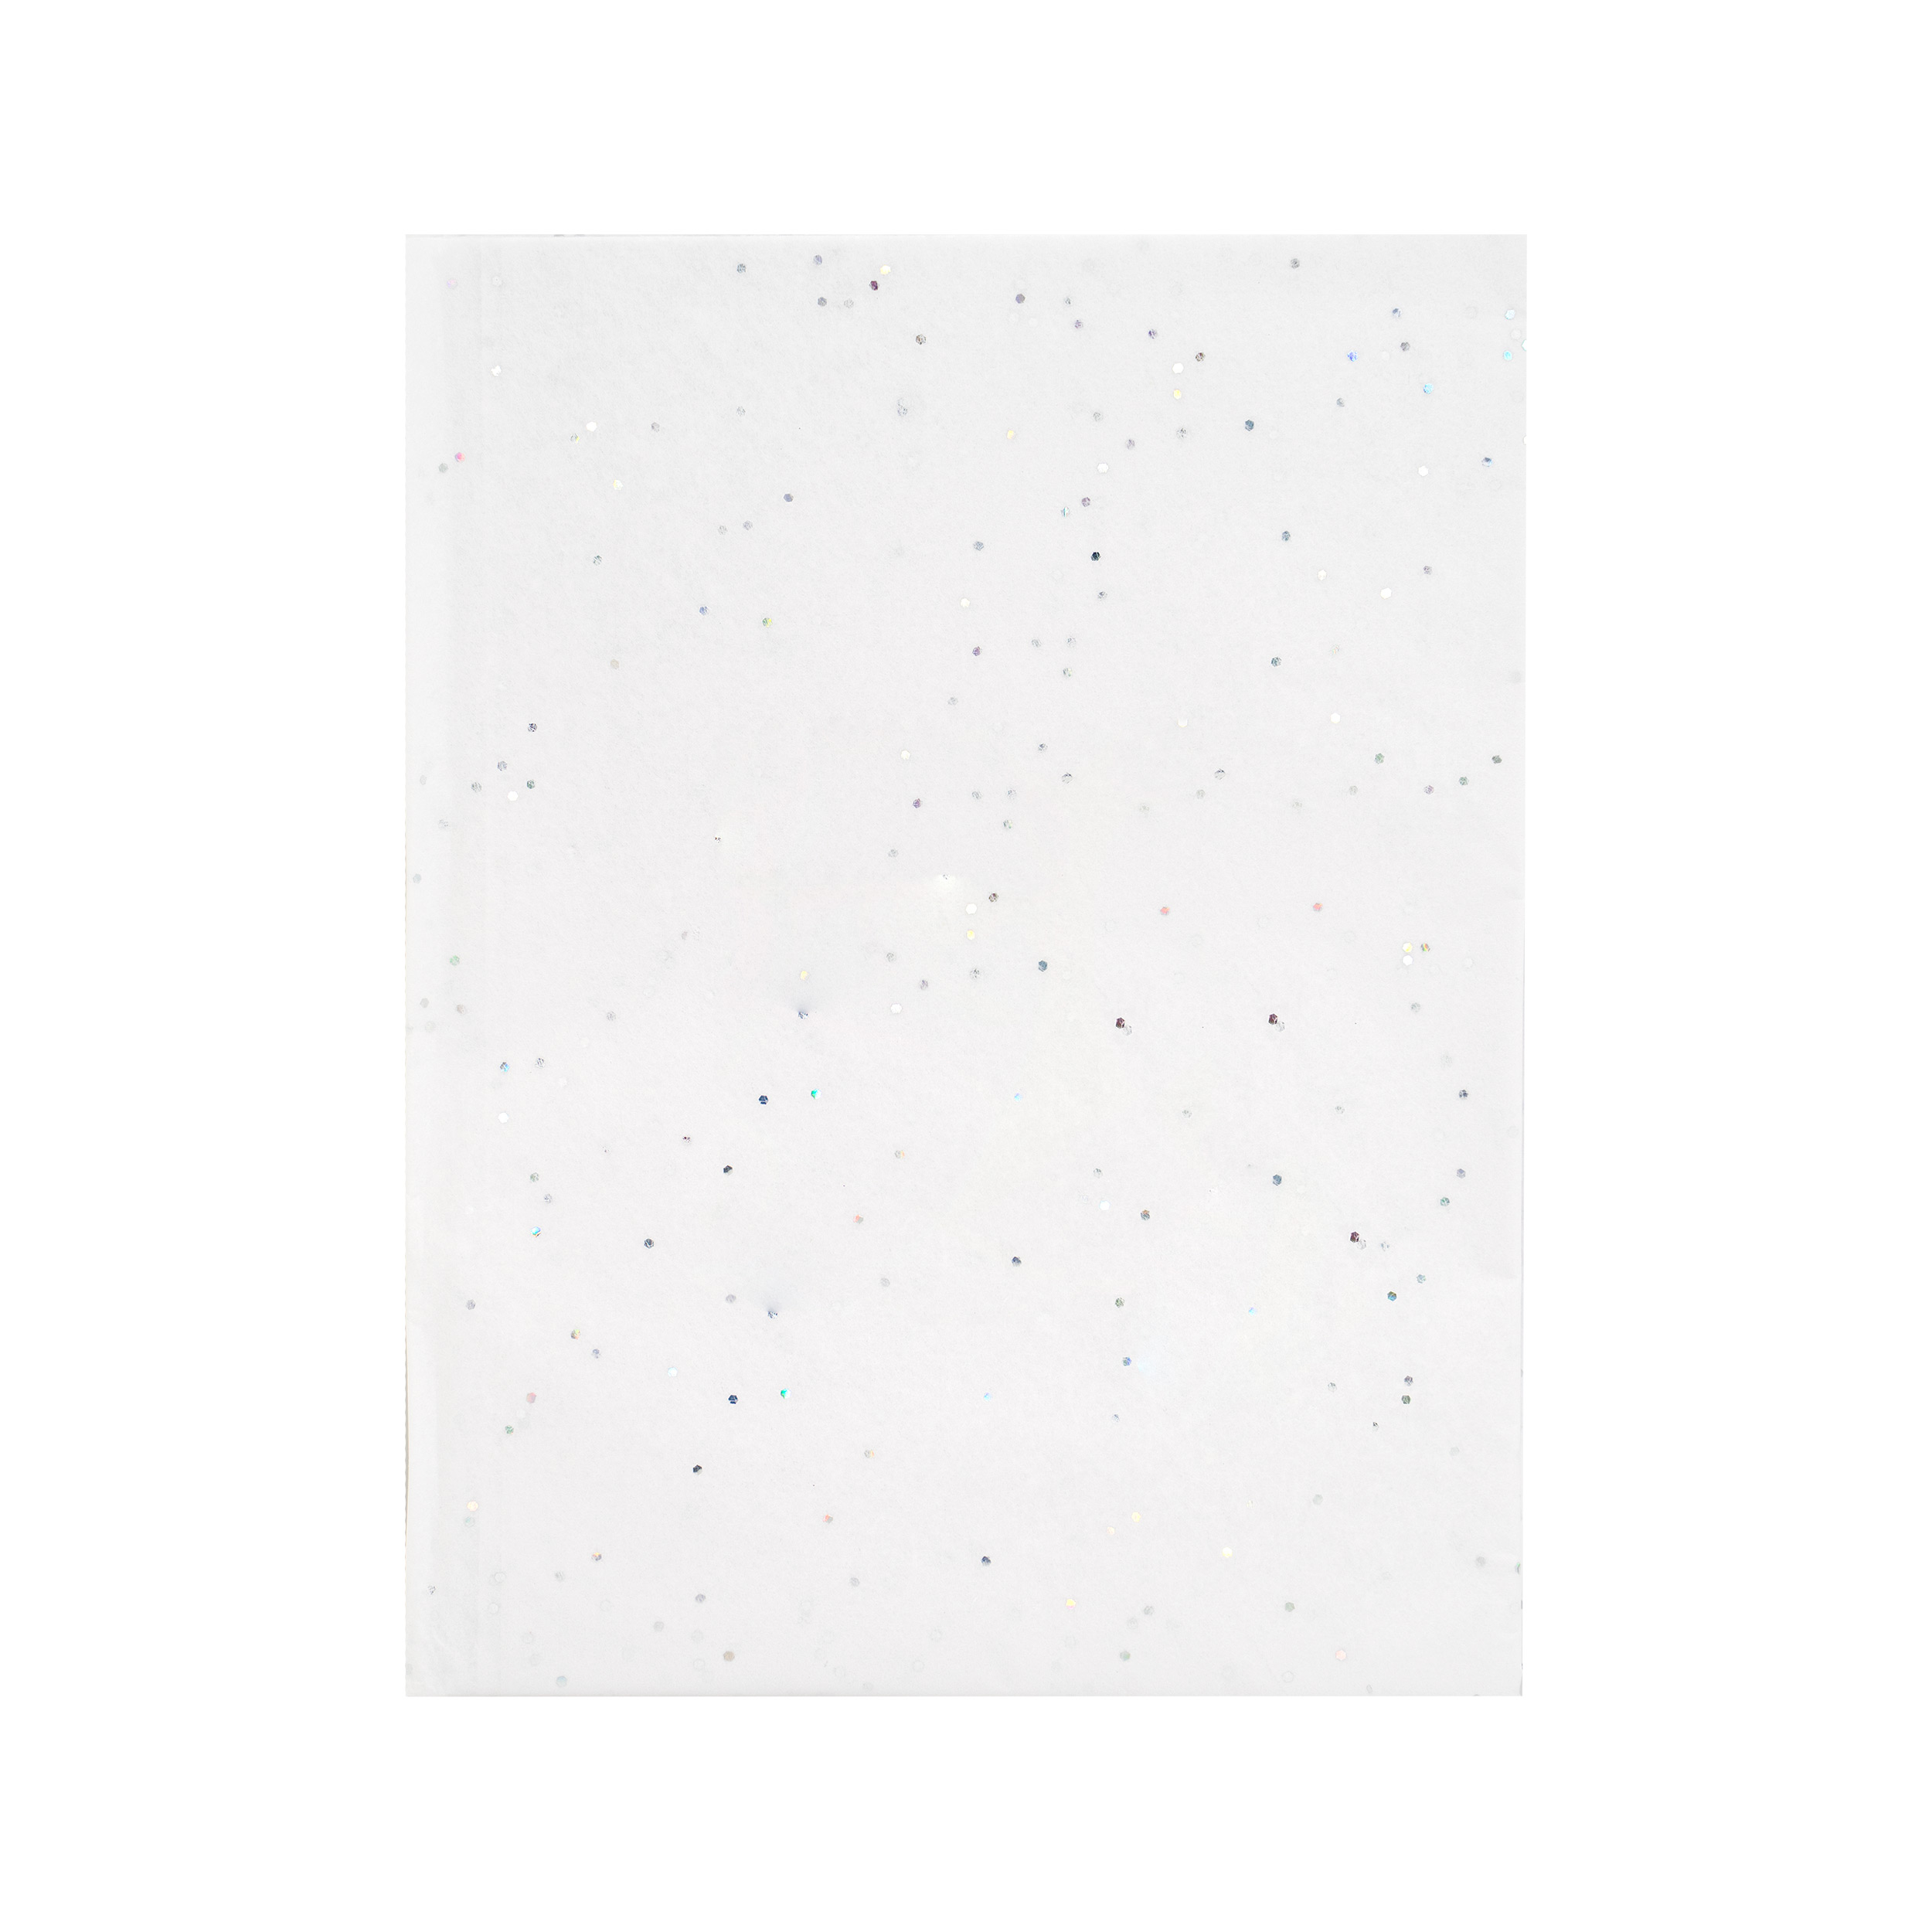 Way To Celebrate White Silver Sequins Tissue Paper 10 Count - image 2 of 4